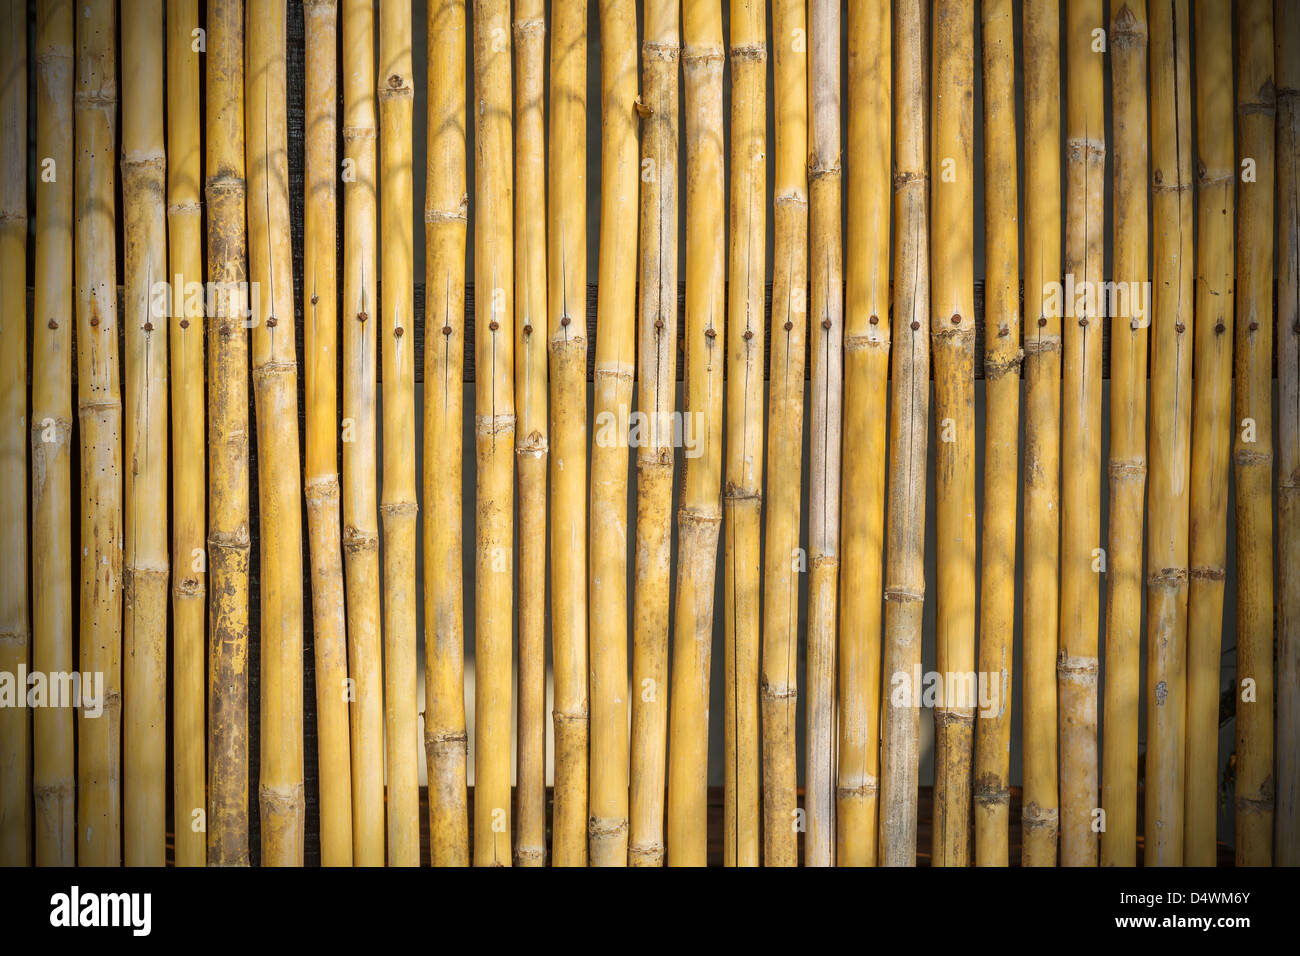 Bamboo fence decoration in Thailand Stock Photo